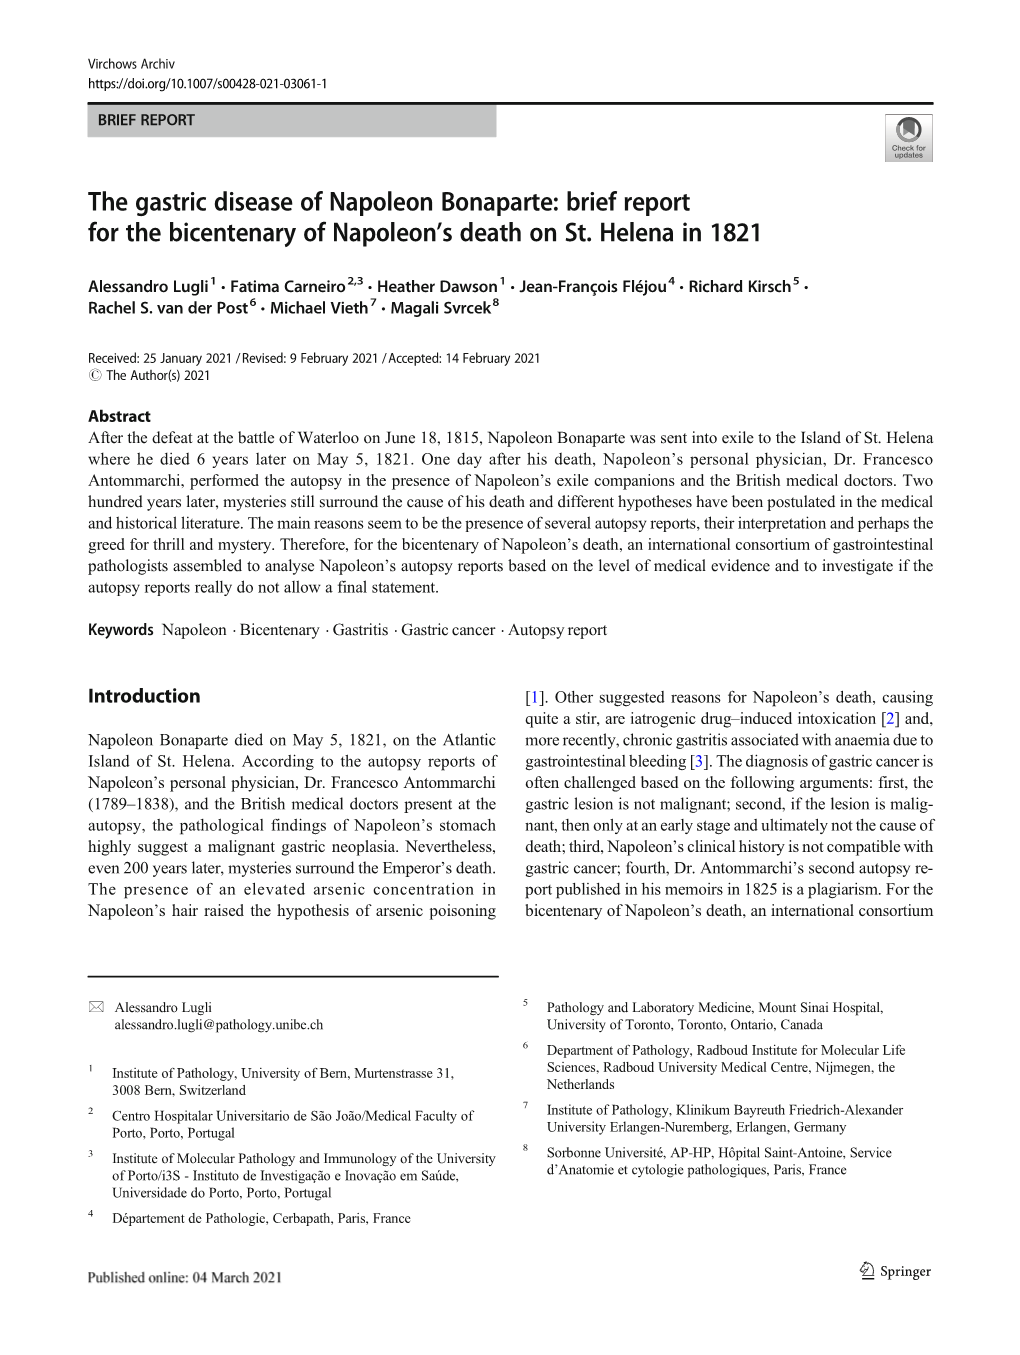 The Gastric Disease of Napoleon Bonaparte: Brief Report for the Bicentenary of Napoleon’S Death on St